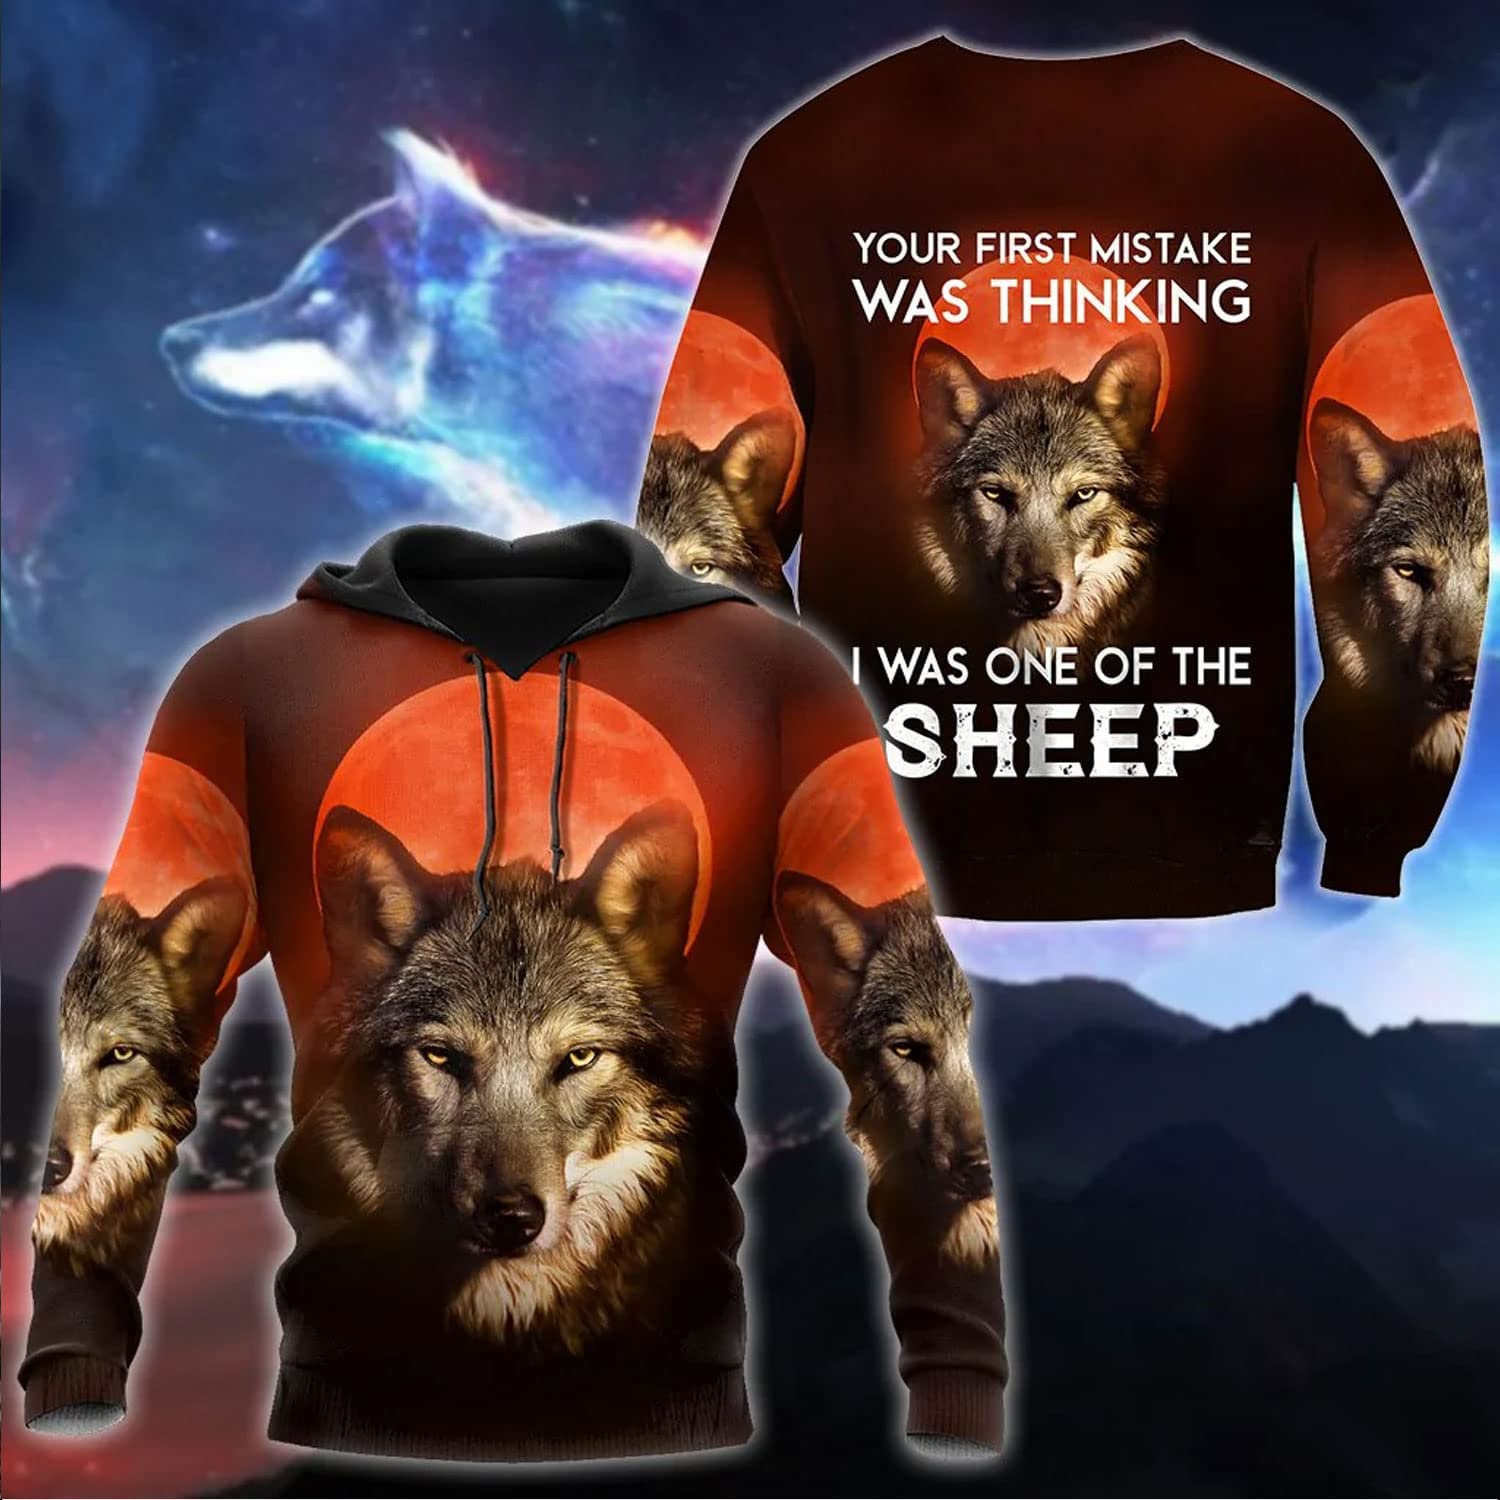 The Insane Red W.o.l.f 3D Hoodie with All-Over Print, Perfect for Wolf Lovers in Winter, Ideal Gift for Hunting Enthusiasts and Family, Available as Pullover Hoodie, Hawaiian Shirt, and Sweatshirt. – JOT1506